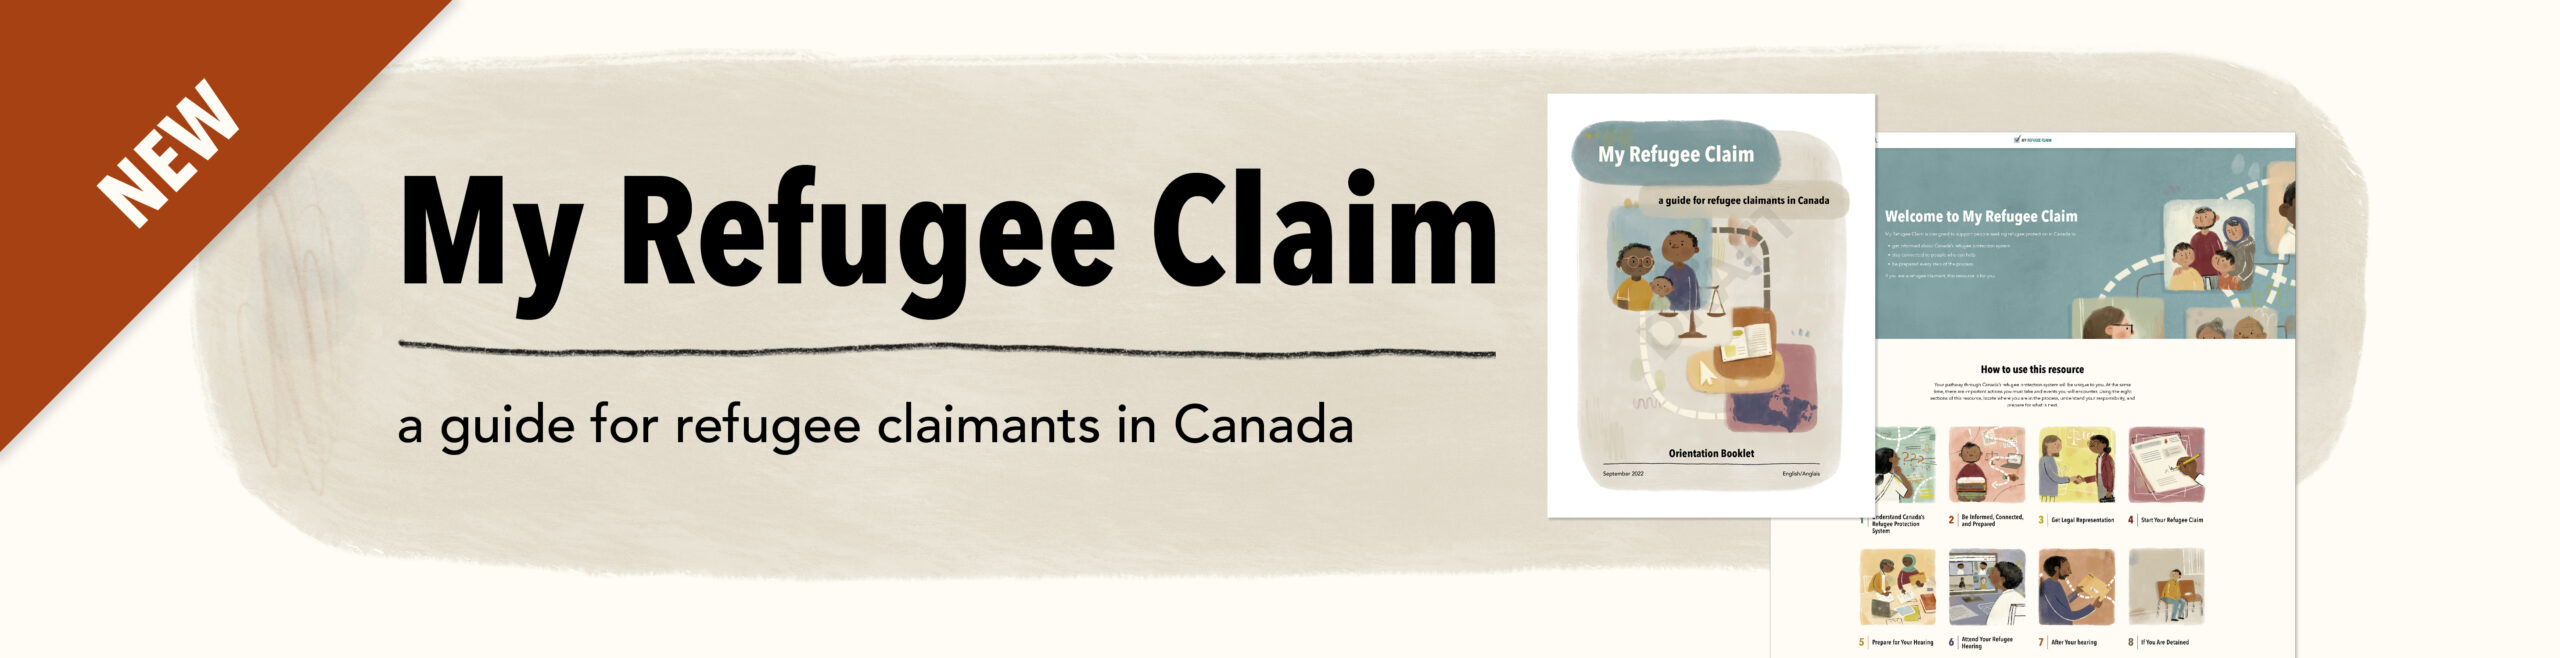 NEW – My Refugee Claim: A guide for refugee claimants in Canada